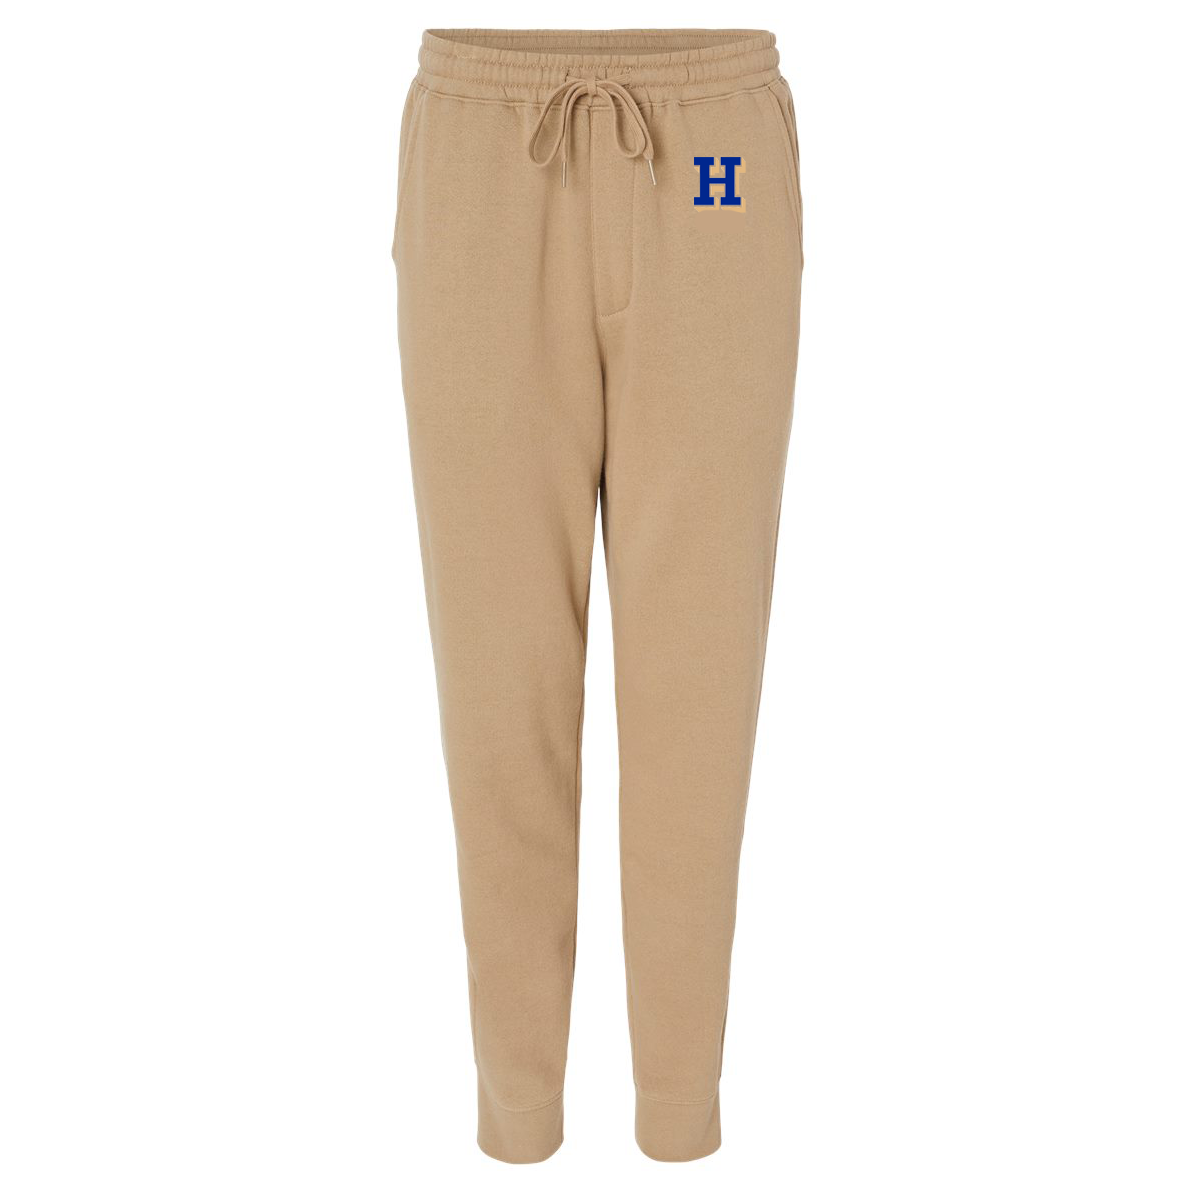 Hamilton College Tennis Independent Trading Co. Mid-weight Fleece Sweatpants